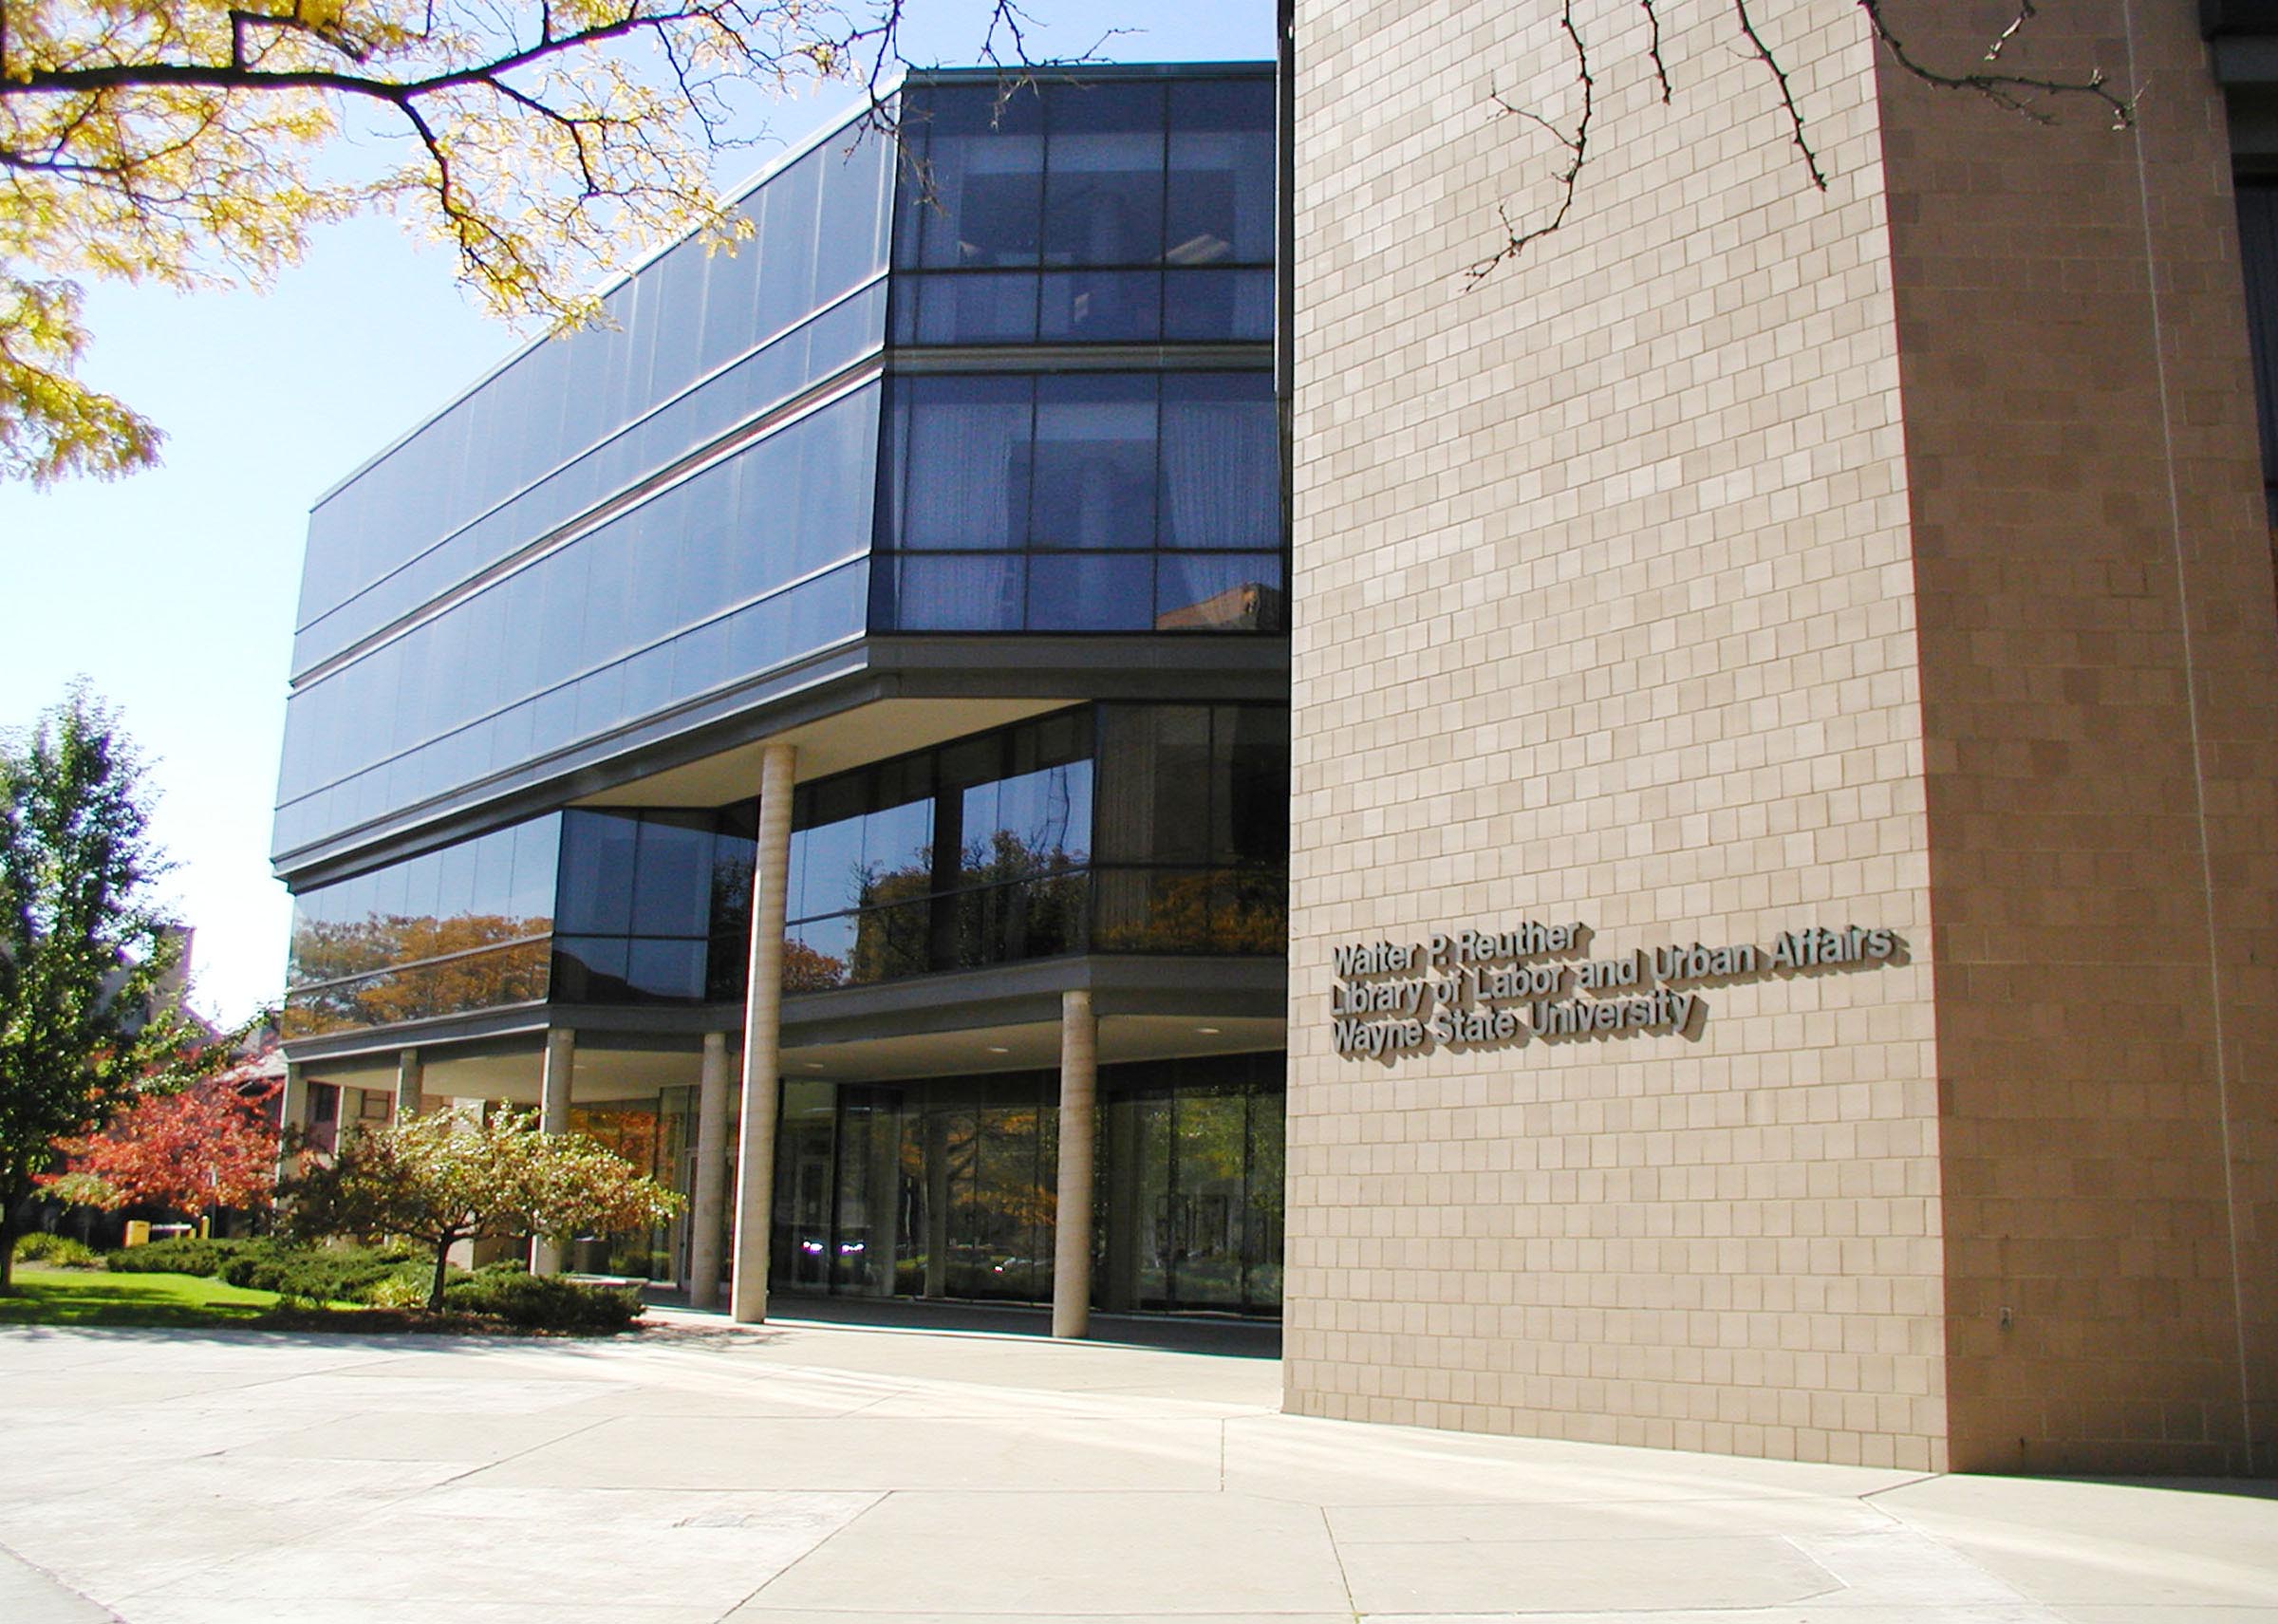 Reuther Library